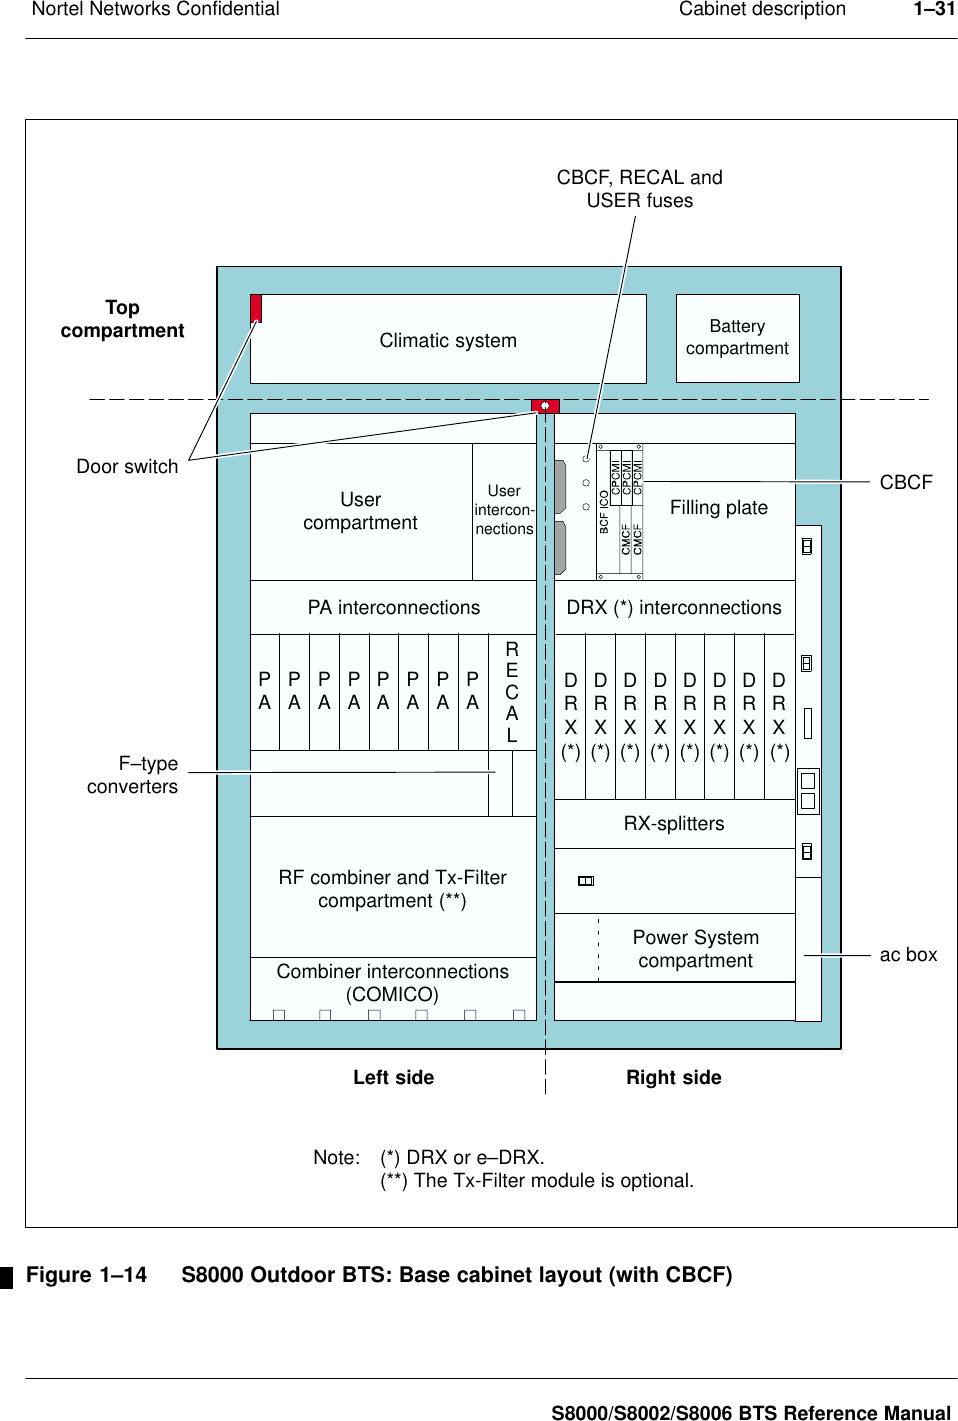 Cabinet descriptionNortel Networks Confidential 1–31S8000/S8002/S8006 BTS Reference ManualPAPAPAPAPAPAPAPARECALClimatic system BatterycompartmentUsercompartmentPA interconnectionsF–typeconvertersCombiner interconnections(COMICO)ac boxDRX (*) interconnectionsPower SystemcompartmentRF combiner and Tx-Filtercompartment (**)CBCFCBCF, RECAL andUSER fusesUserintercon-nectionsLeft side Right sideRX-splittersDRXDRXDRXDRXDRXFilling plateDRXTopcompartmentDoor switchDRXDRX(*) (*) (*) (*) (*) (*) (*) (*)Note: (*) DRX or e–DRX.(**) The Tx-Filter module is optional.Figure 1–14 S8000 Outdoor BTS: Base cabinet layout (with CBCF)